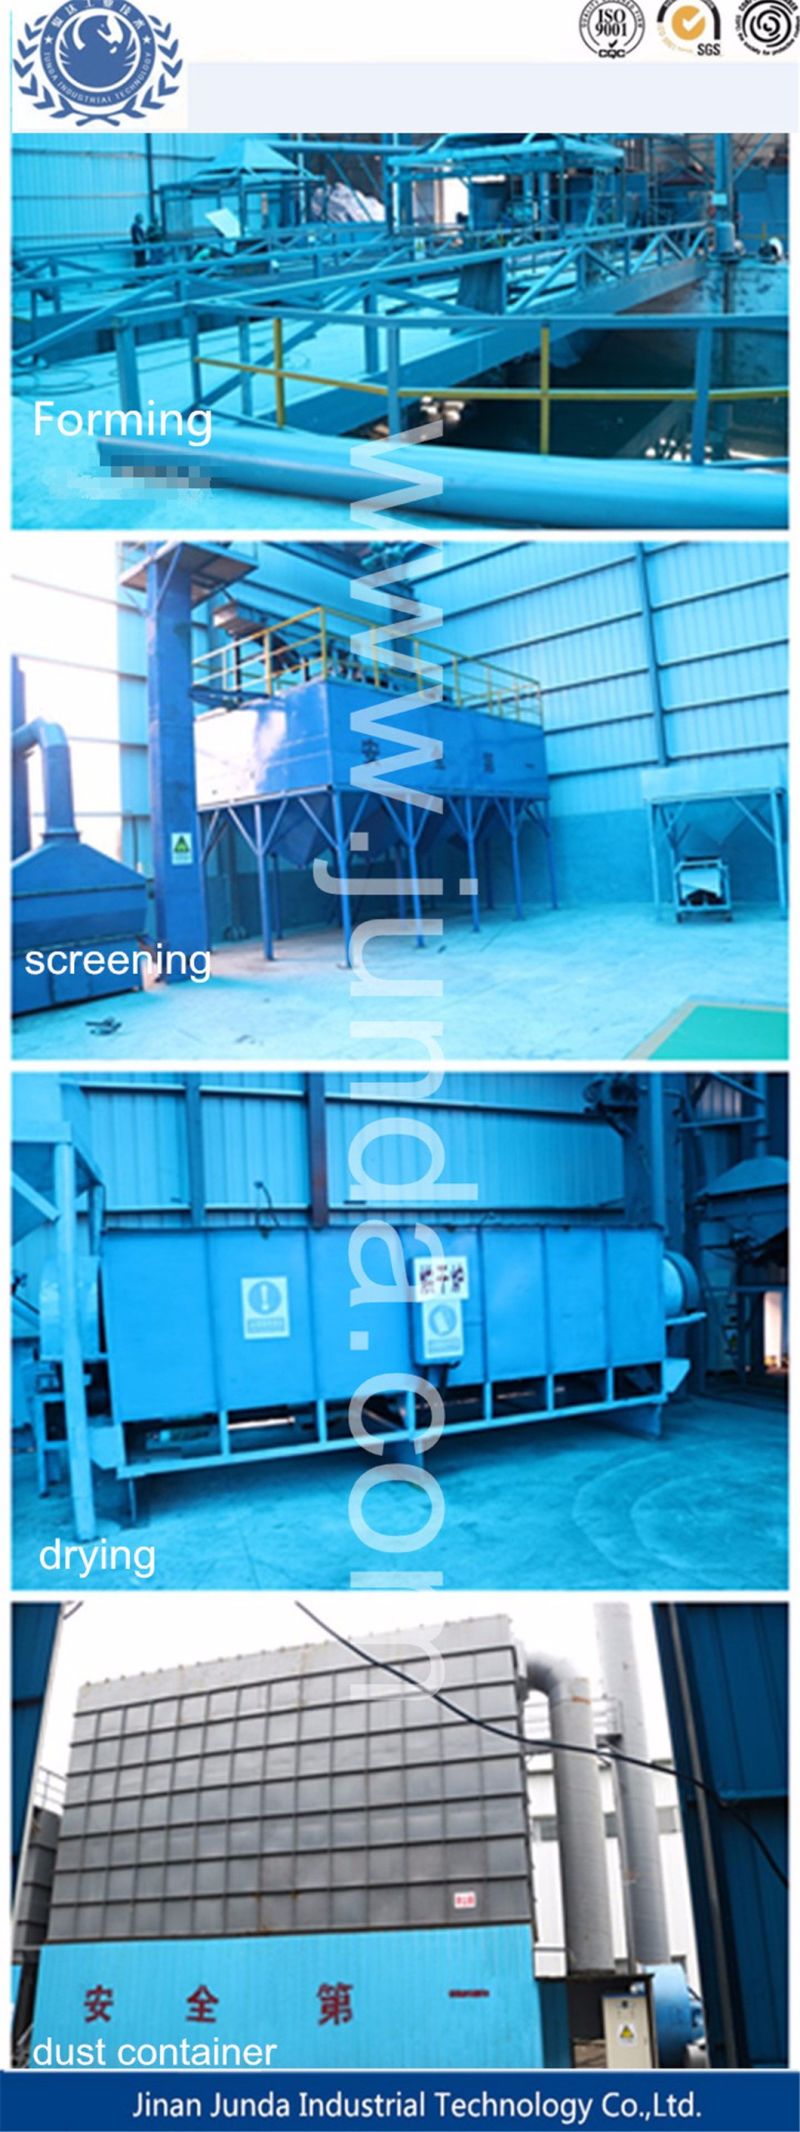 ISO Low Carbon Content/Steel Shot Abrasive for Sandblasting